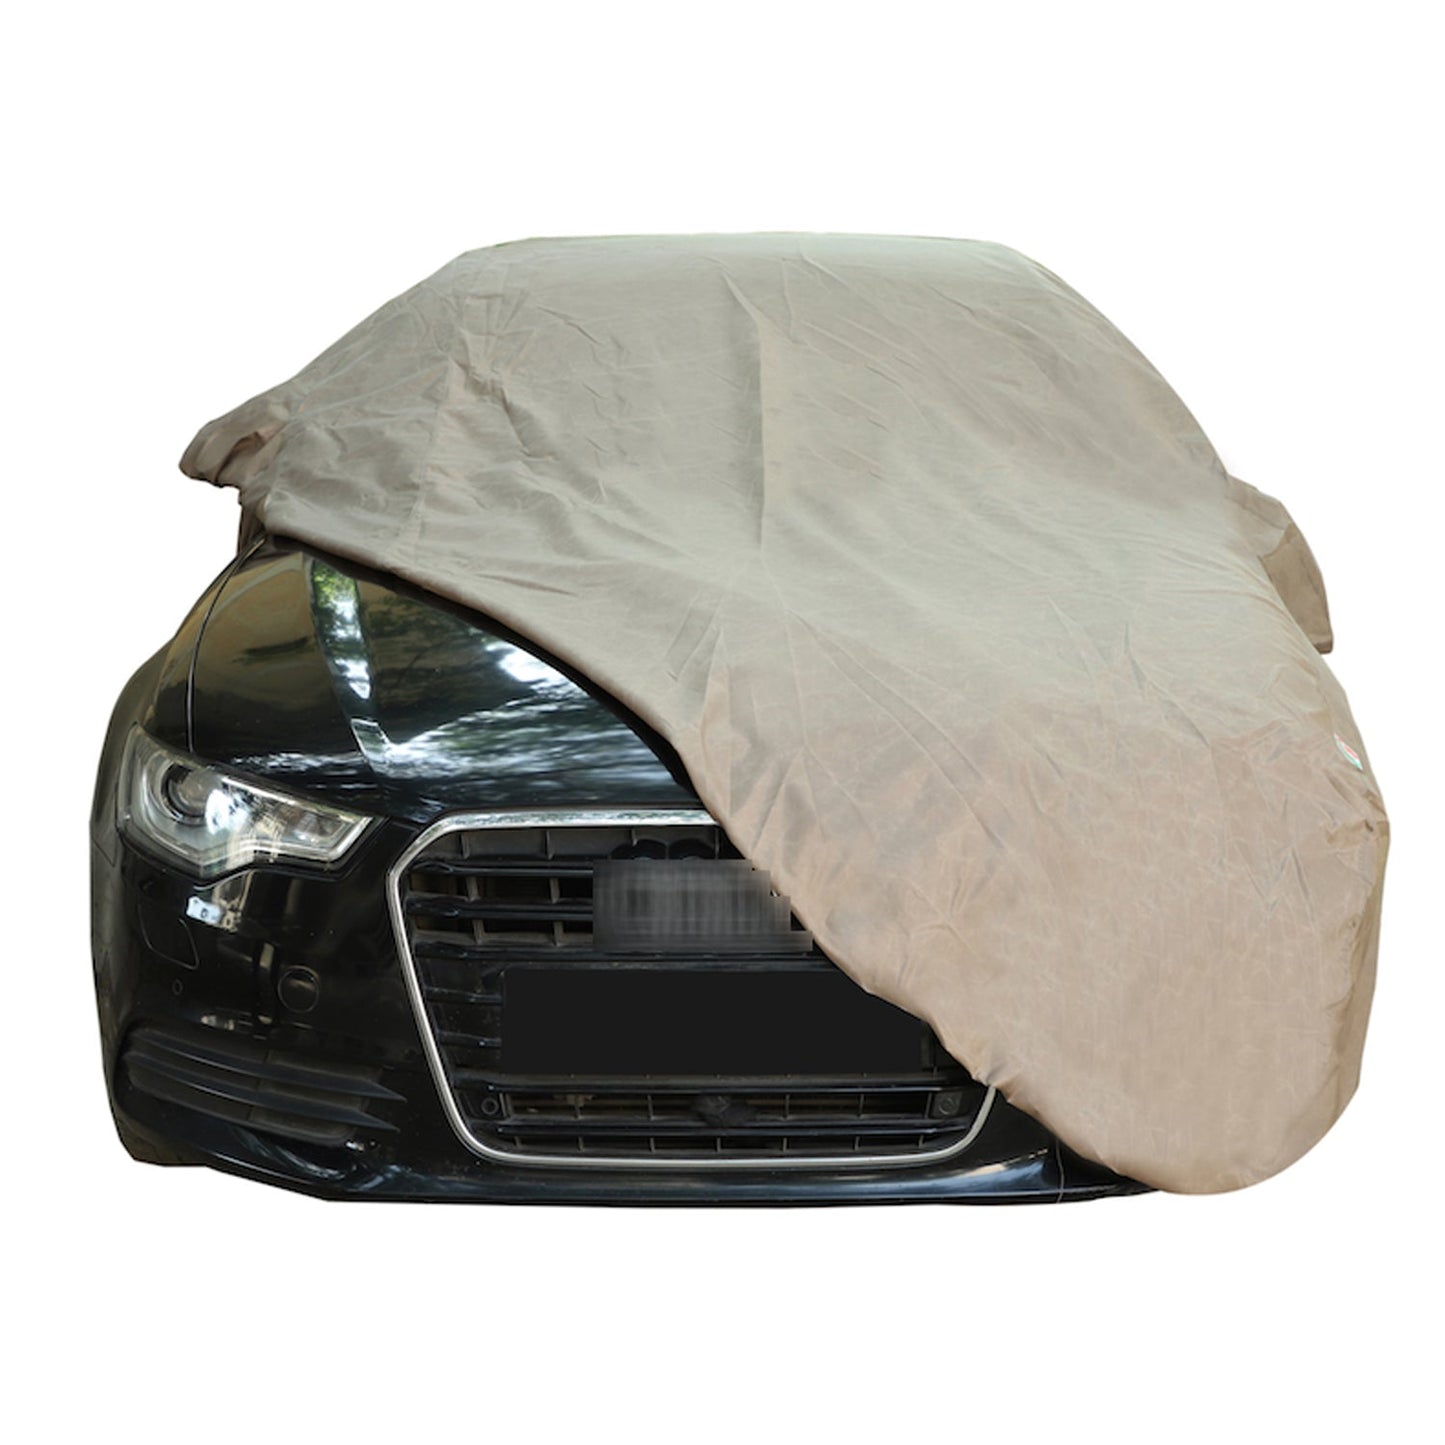 Oshotto Brown 100% Waterproof Car Body Cover with Mirror Pockets For Tata Indigo Manza